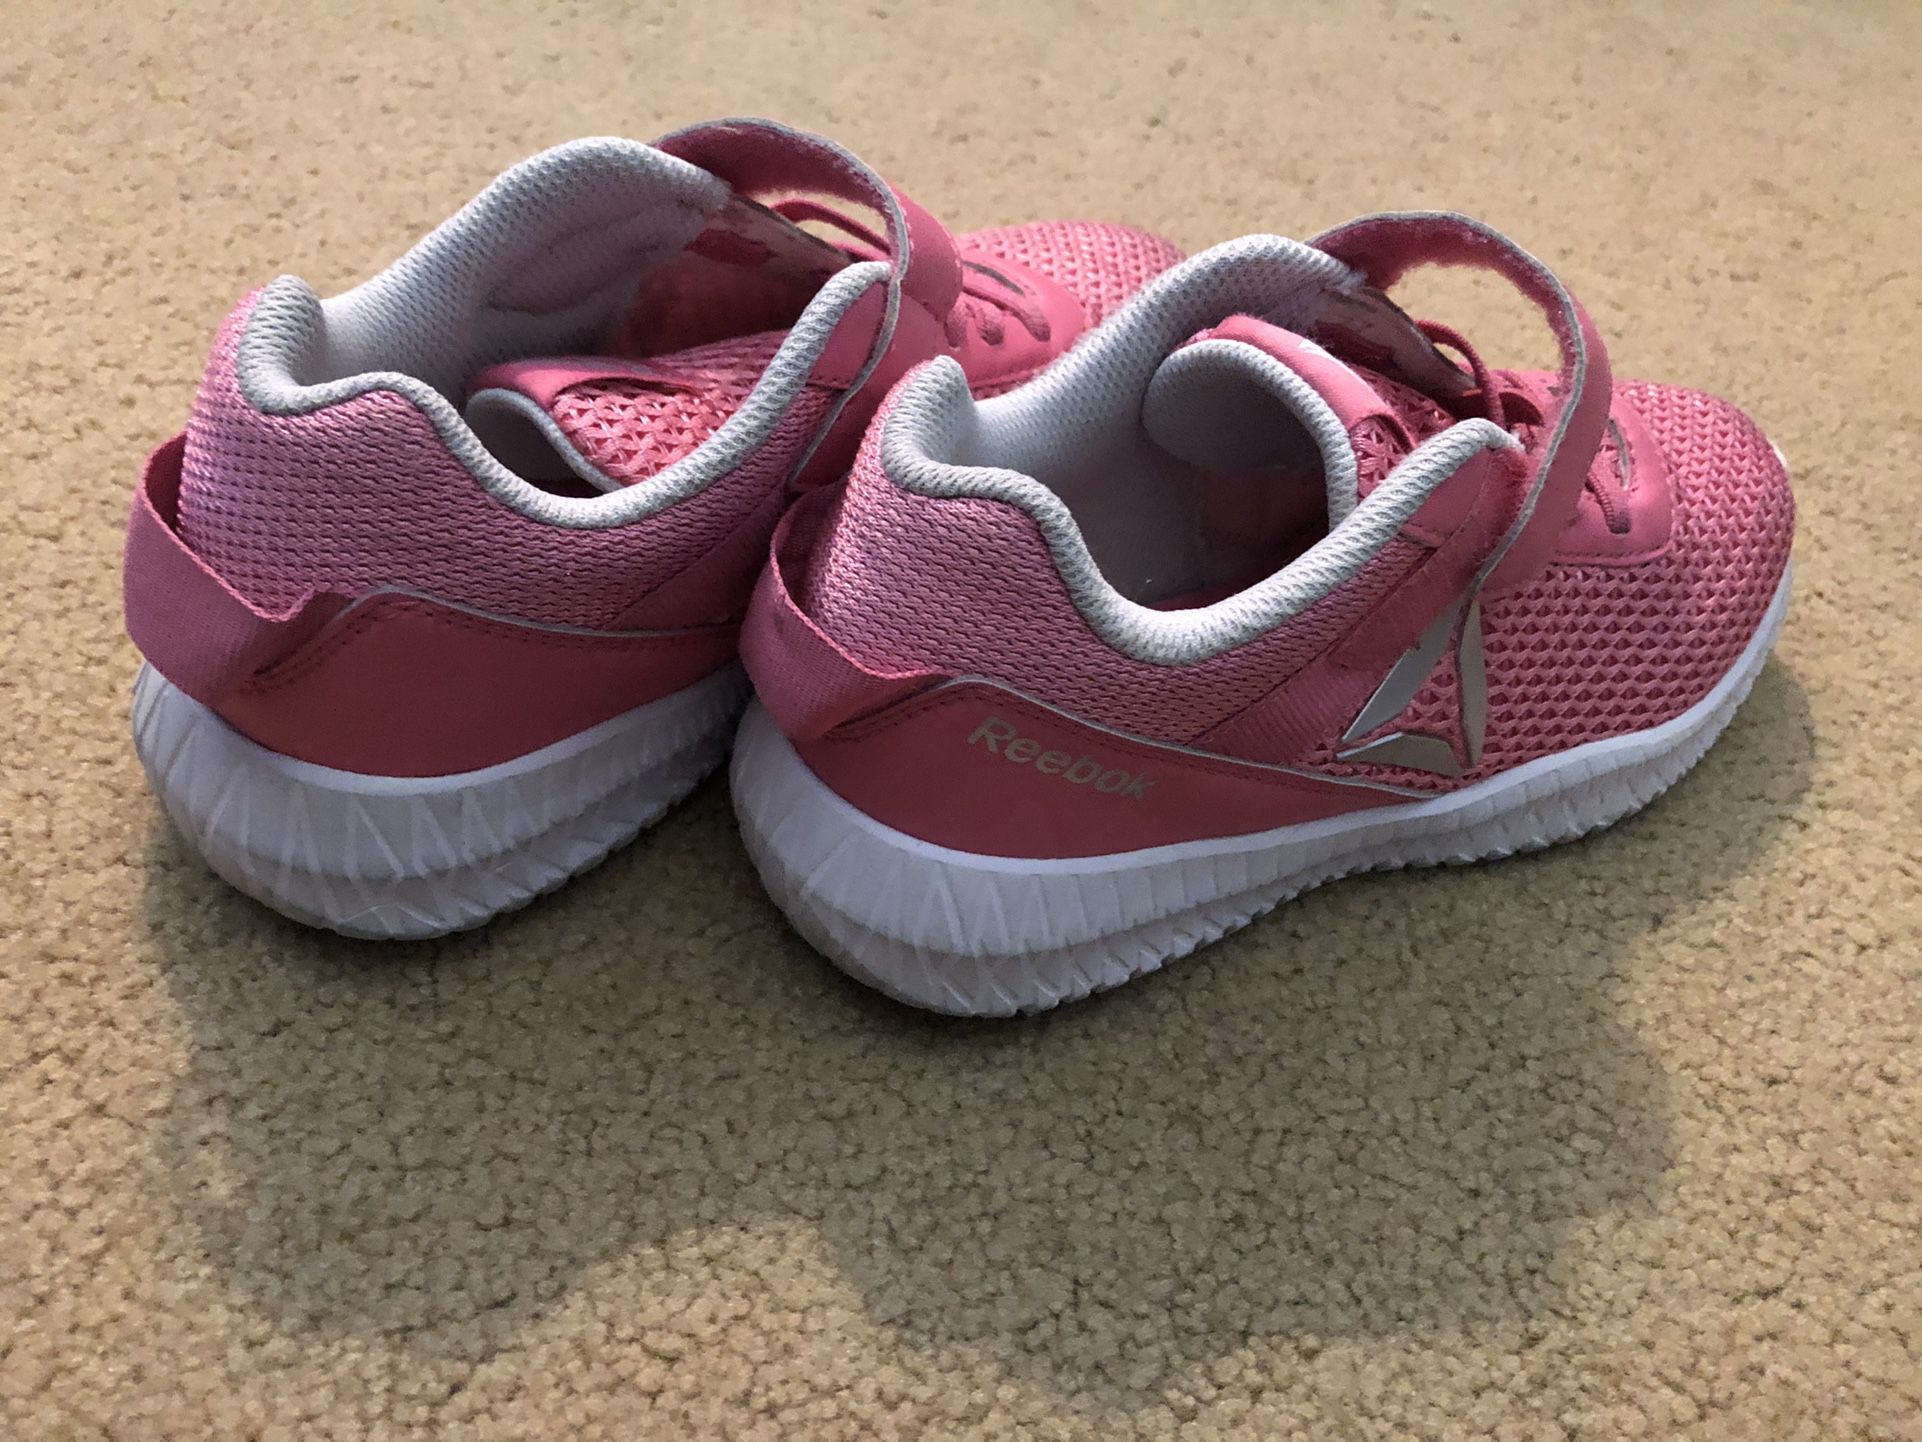 Girl’s Reebok Shoes Size US 1 1/2